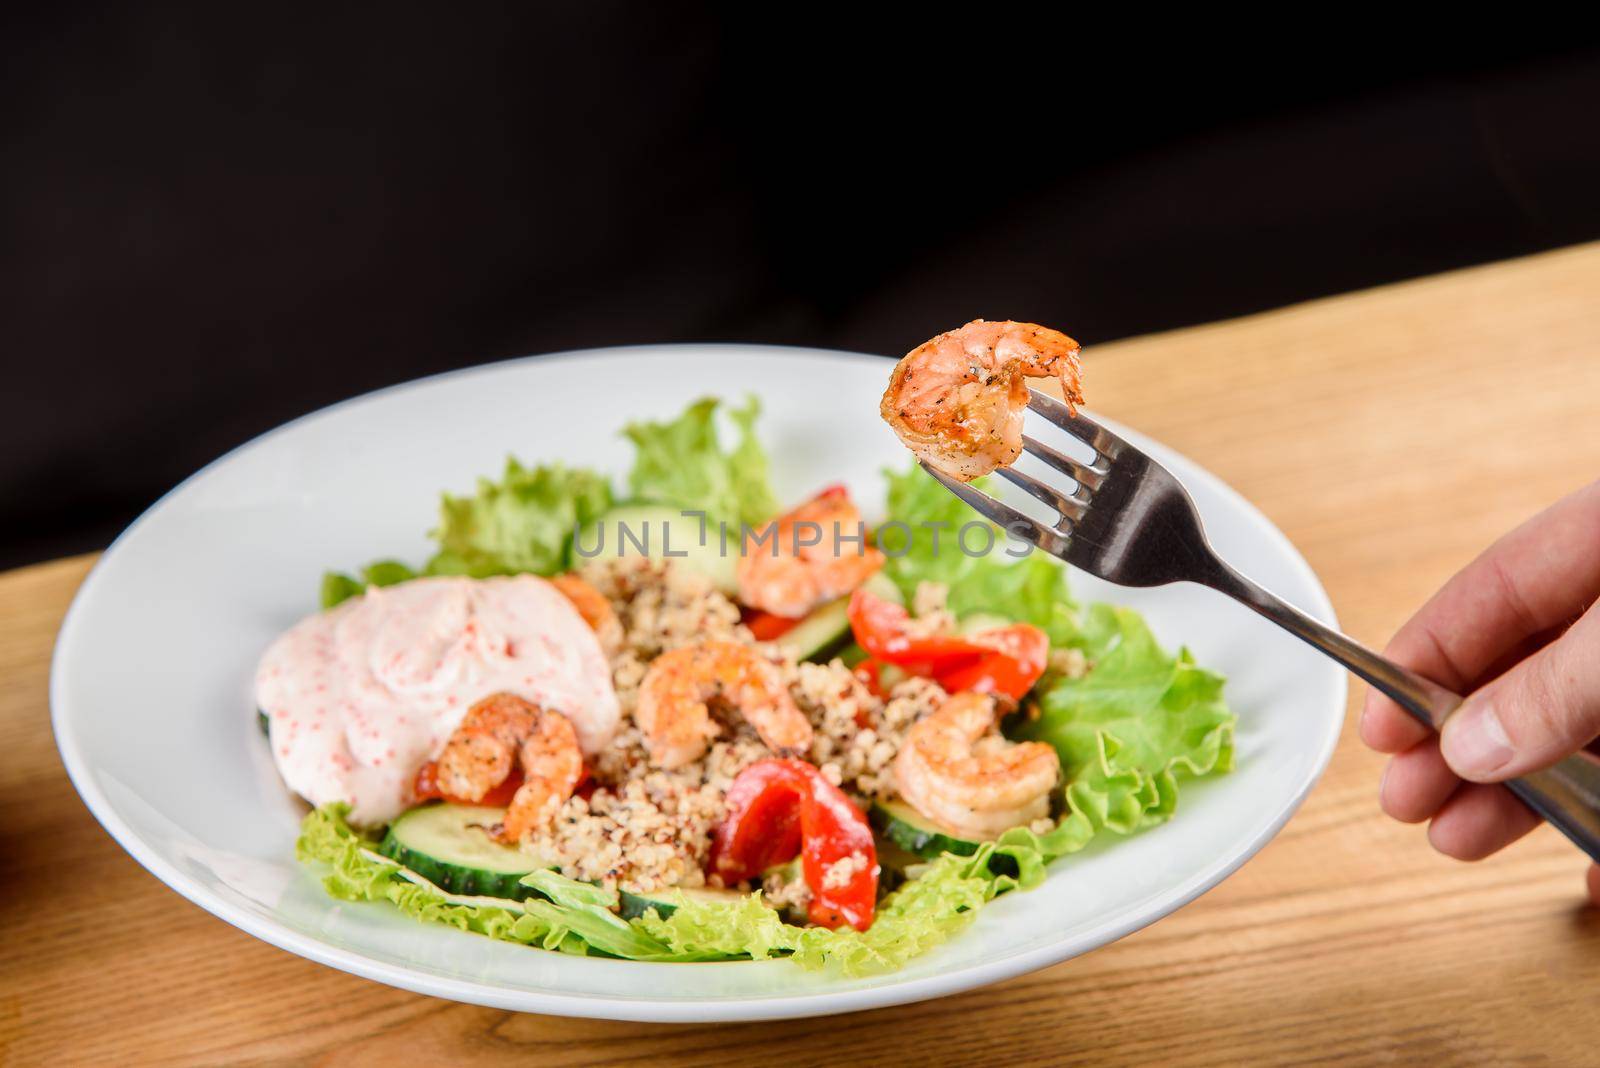 Salad with shrimps, quinoa, tomatoes, peppers, cucumber, lettuce, mayonnaise on white round plate on wooden table.